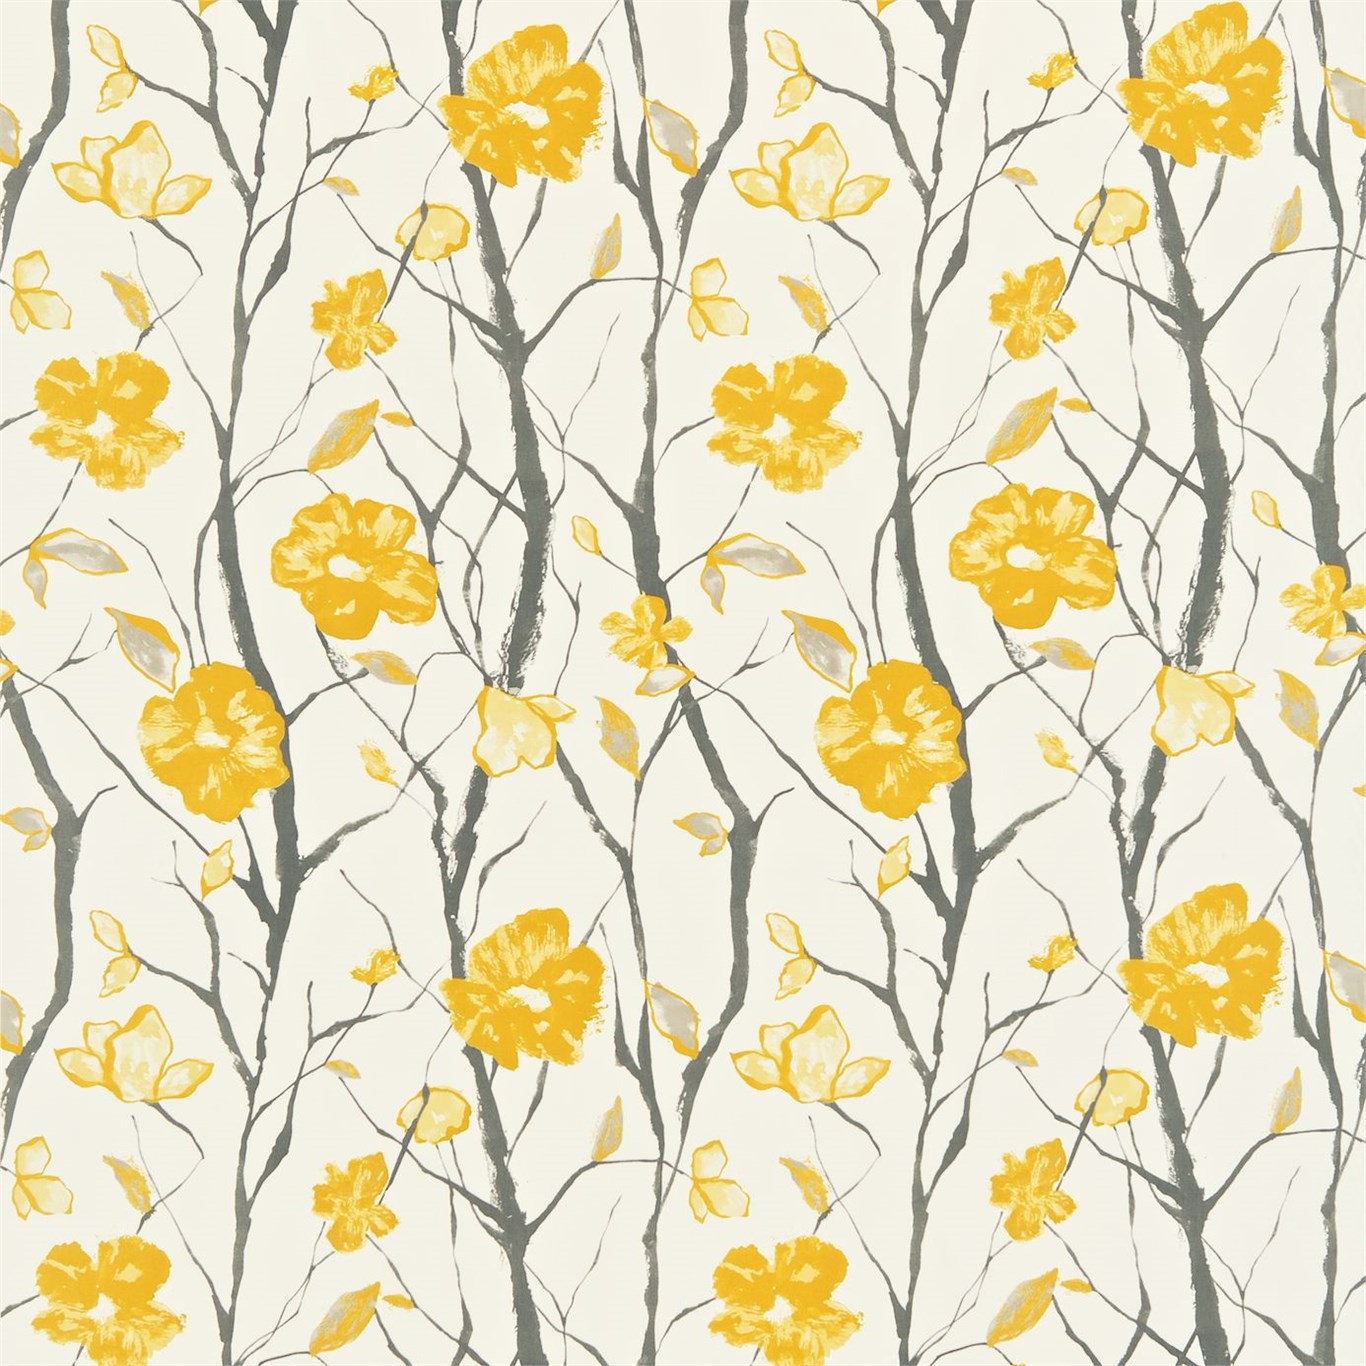 Celandine Fabric by Scion - NMEL120055 - Chalk Charcoal And Sunflower